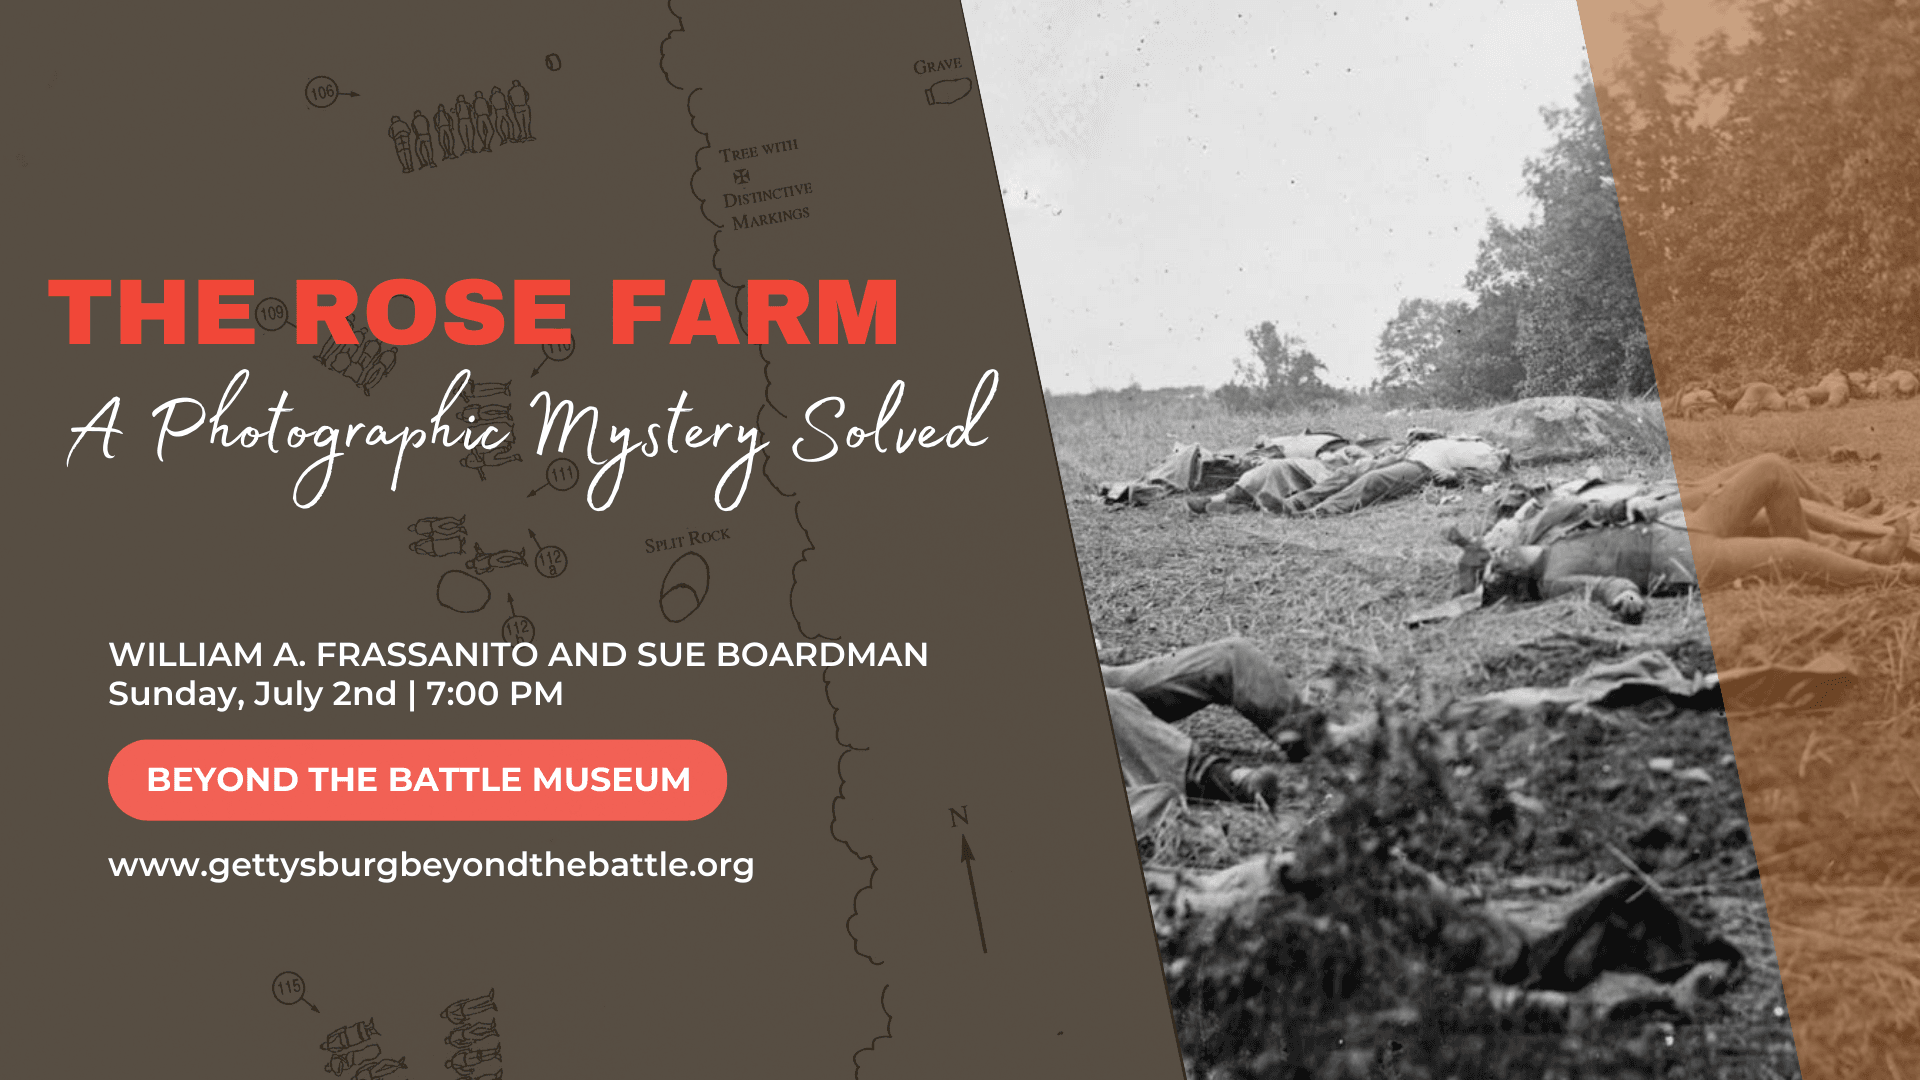 The Rose Farm - A Photographic Mystery Solved